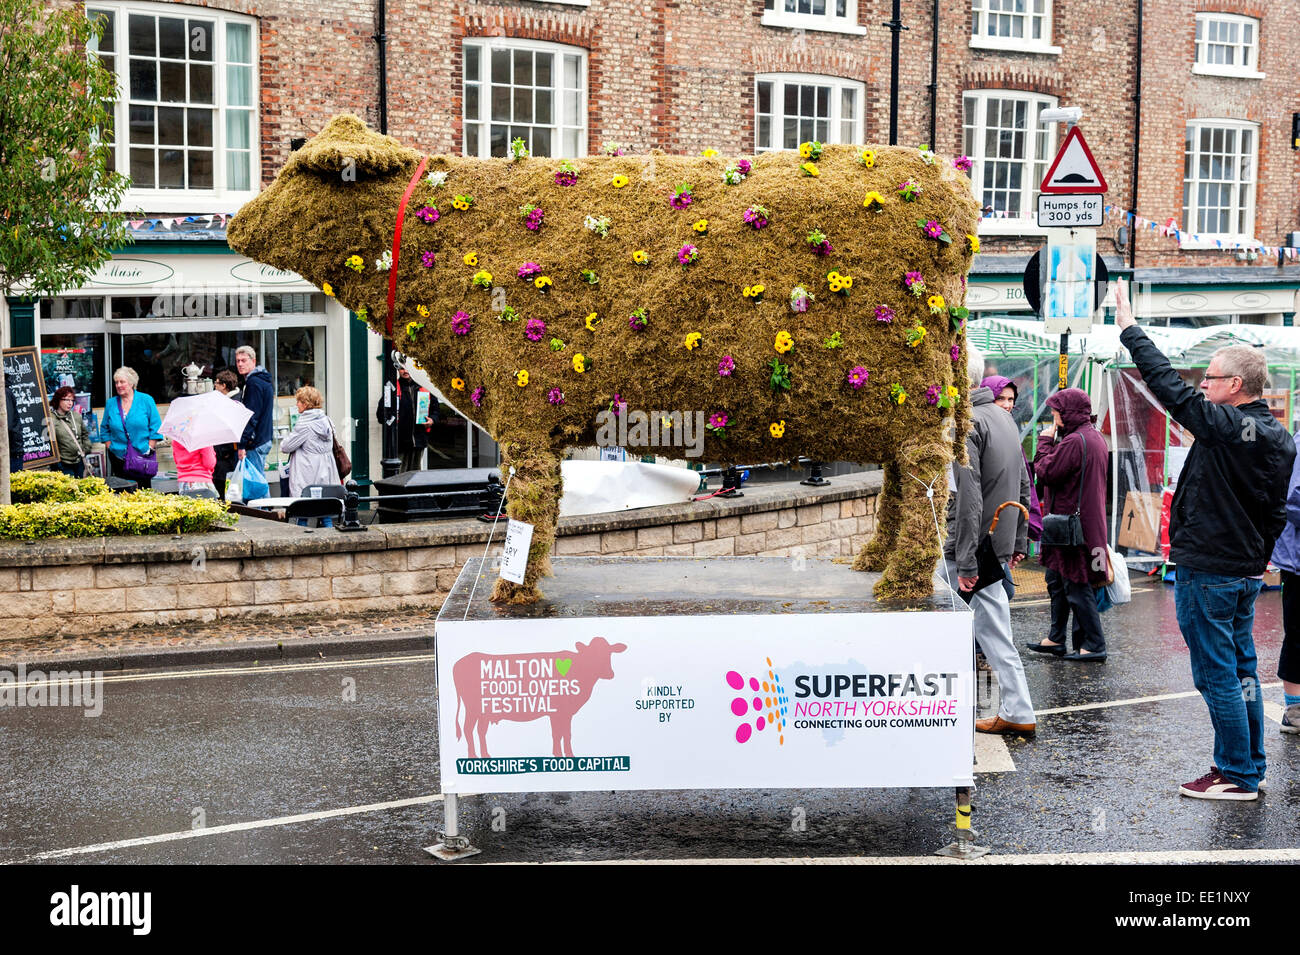 A flower covered cow advertising Malton Food Lovers Festival Stock Photo